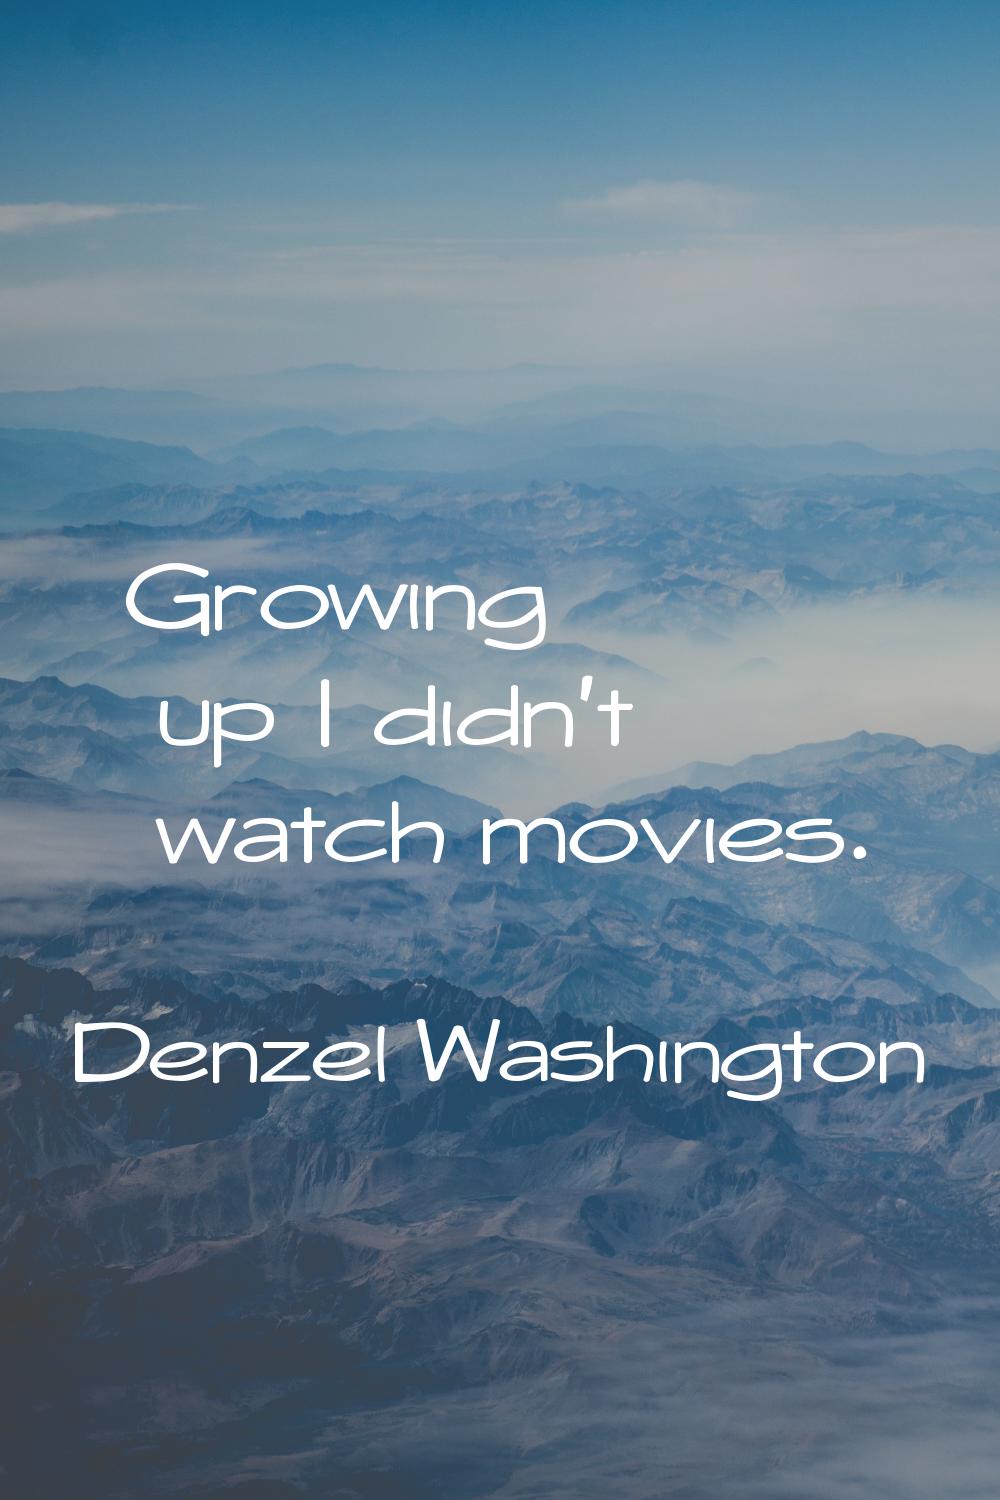 Growing up I didn't watch movies.